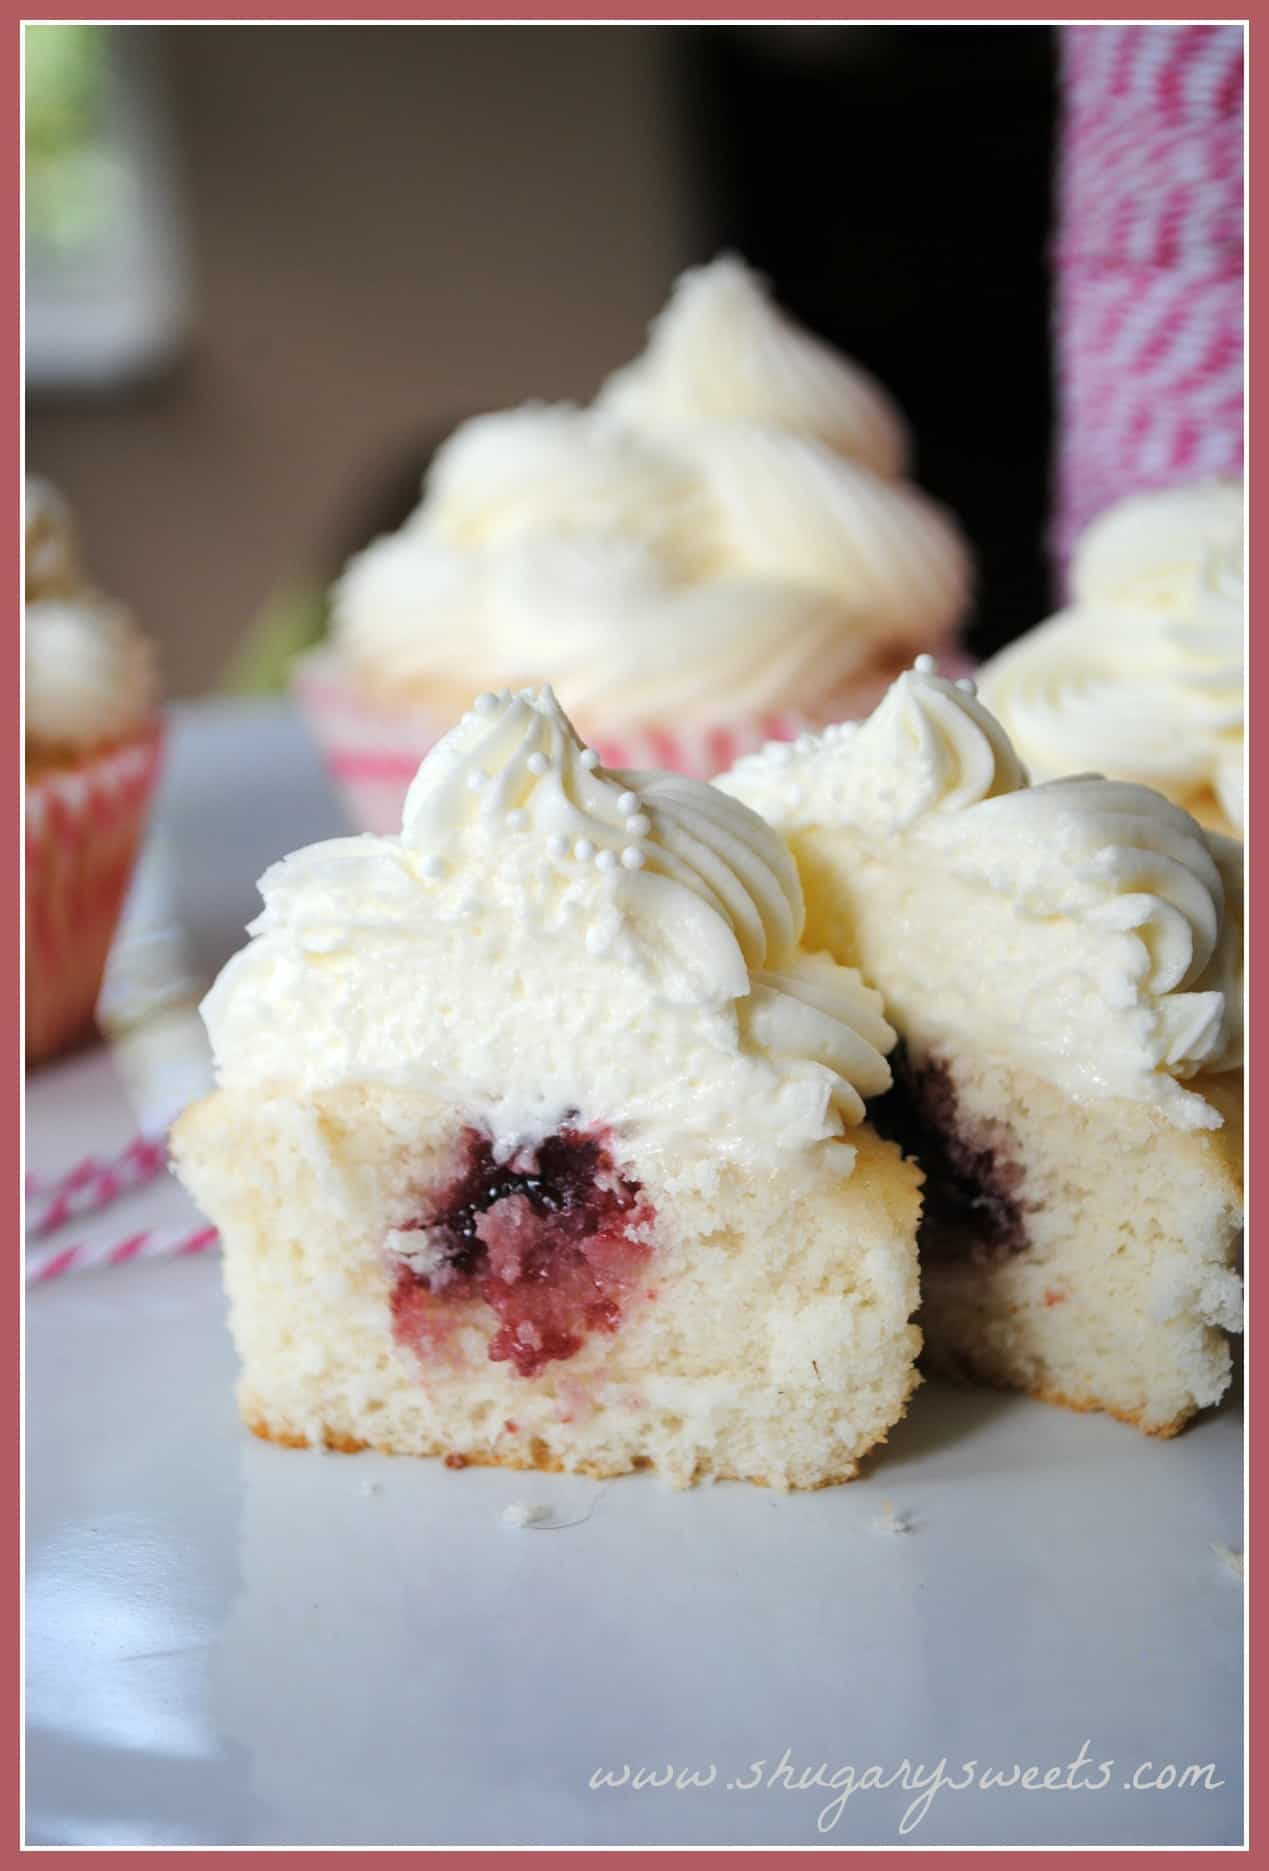 Wedding Cake Fillings Recipes
 Almond Wedding Cake Cupcakes with Raspberry Filling